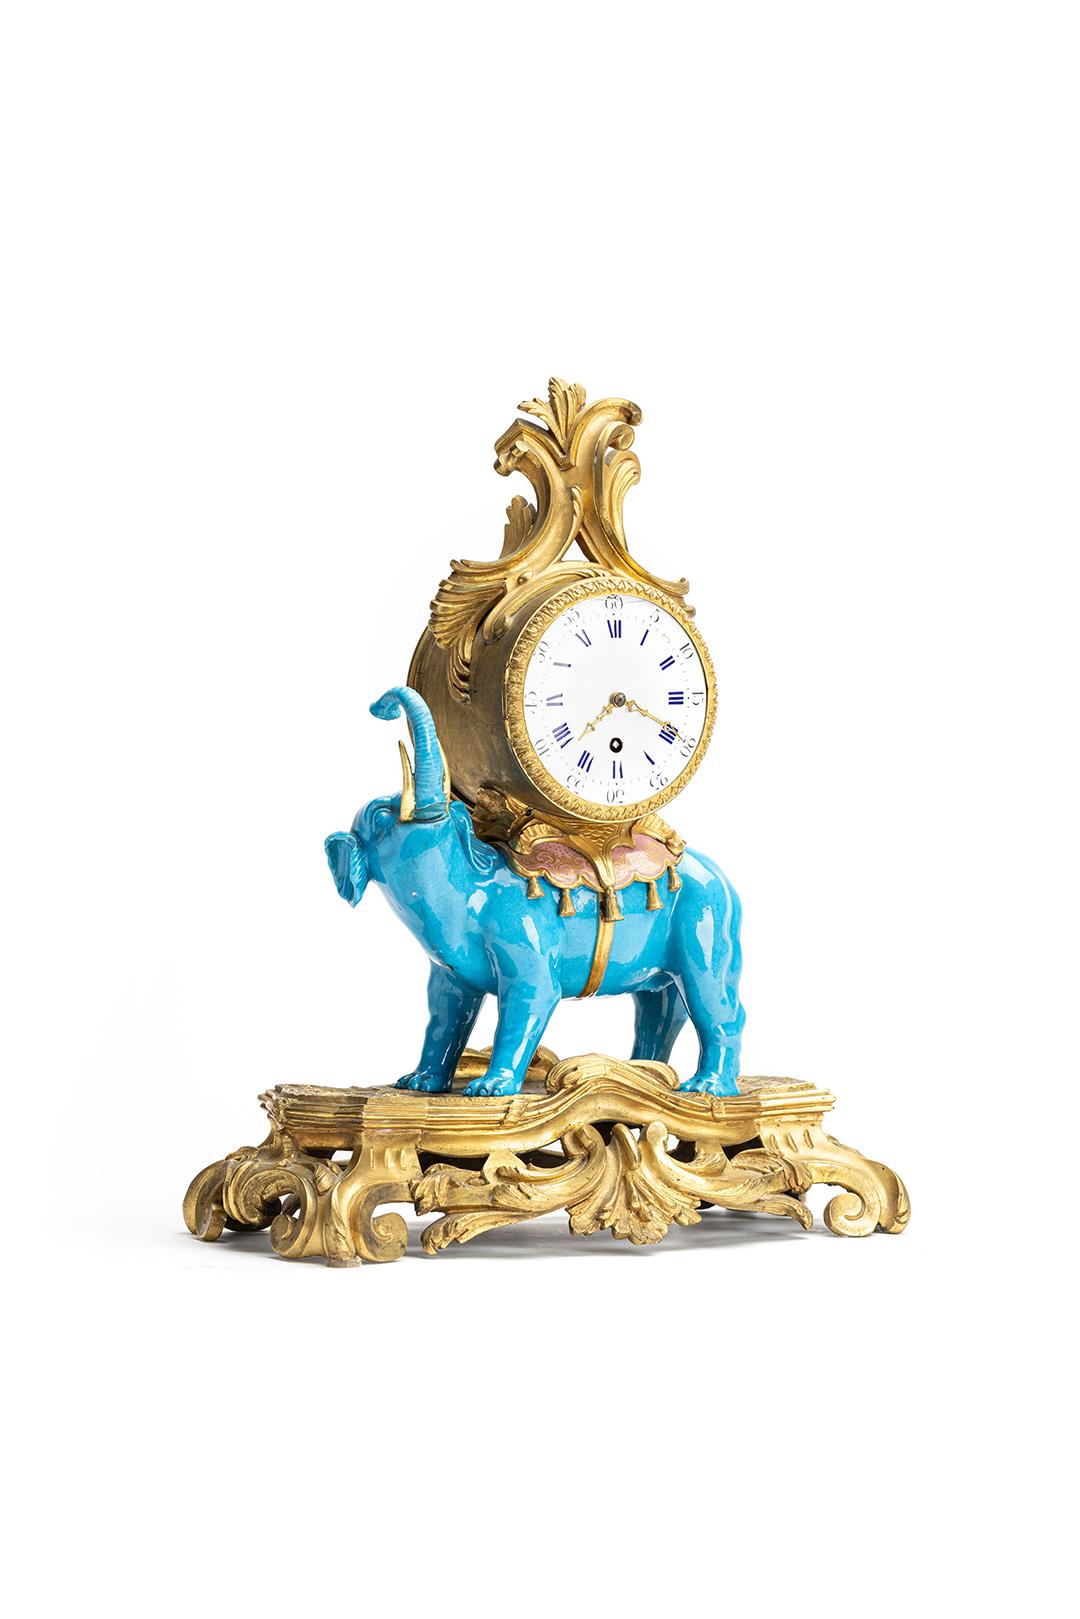 This is serious, and probably Louis XV-inspired, untouched English 19th-century mantel clock in the form of an elephant, dating back to circa 1870. The beautiful blue porcelain elephant provides a striking contrast with the high-quality, detailed